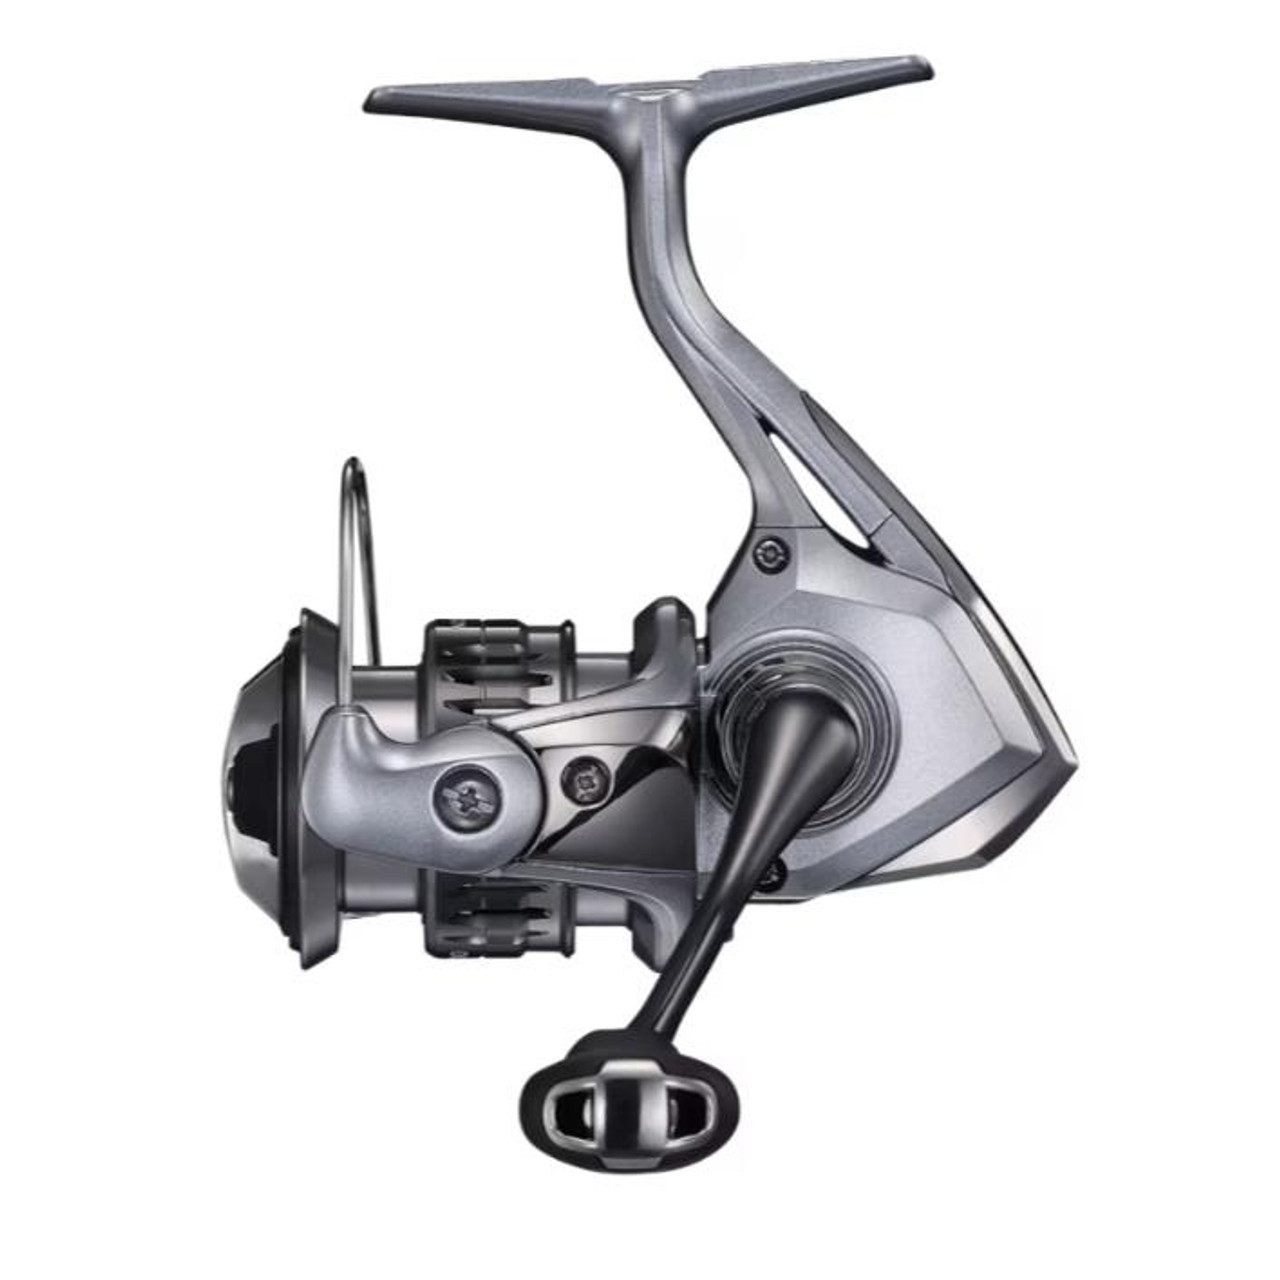 https://cdn11.bigcommerce.com/s-stfpjhht/images/stencil/1280x1280/products/28459/49582/Shimano-Nasci-FC-Spinning-Reel-NAS500FC-022255248099_image1__39968.1687972268.jpg?c=2